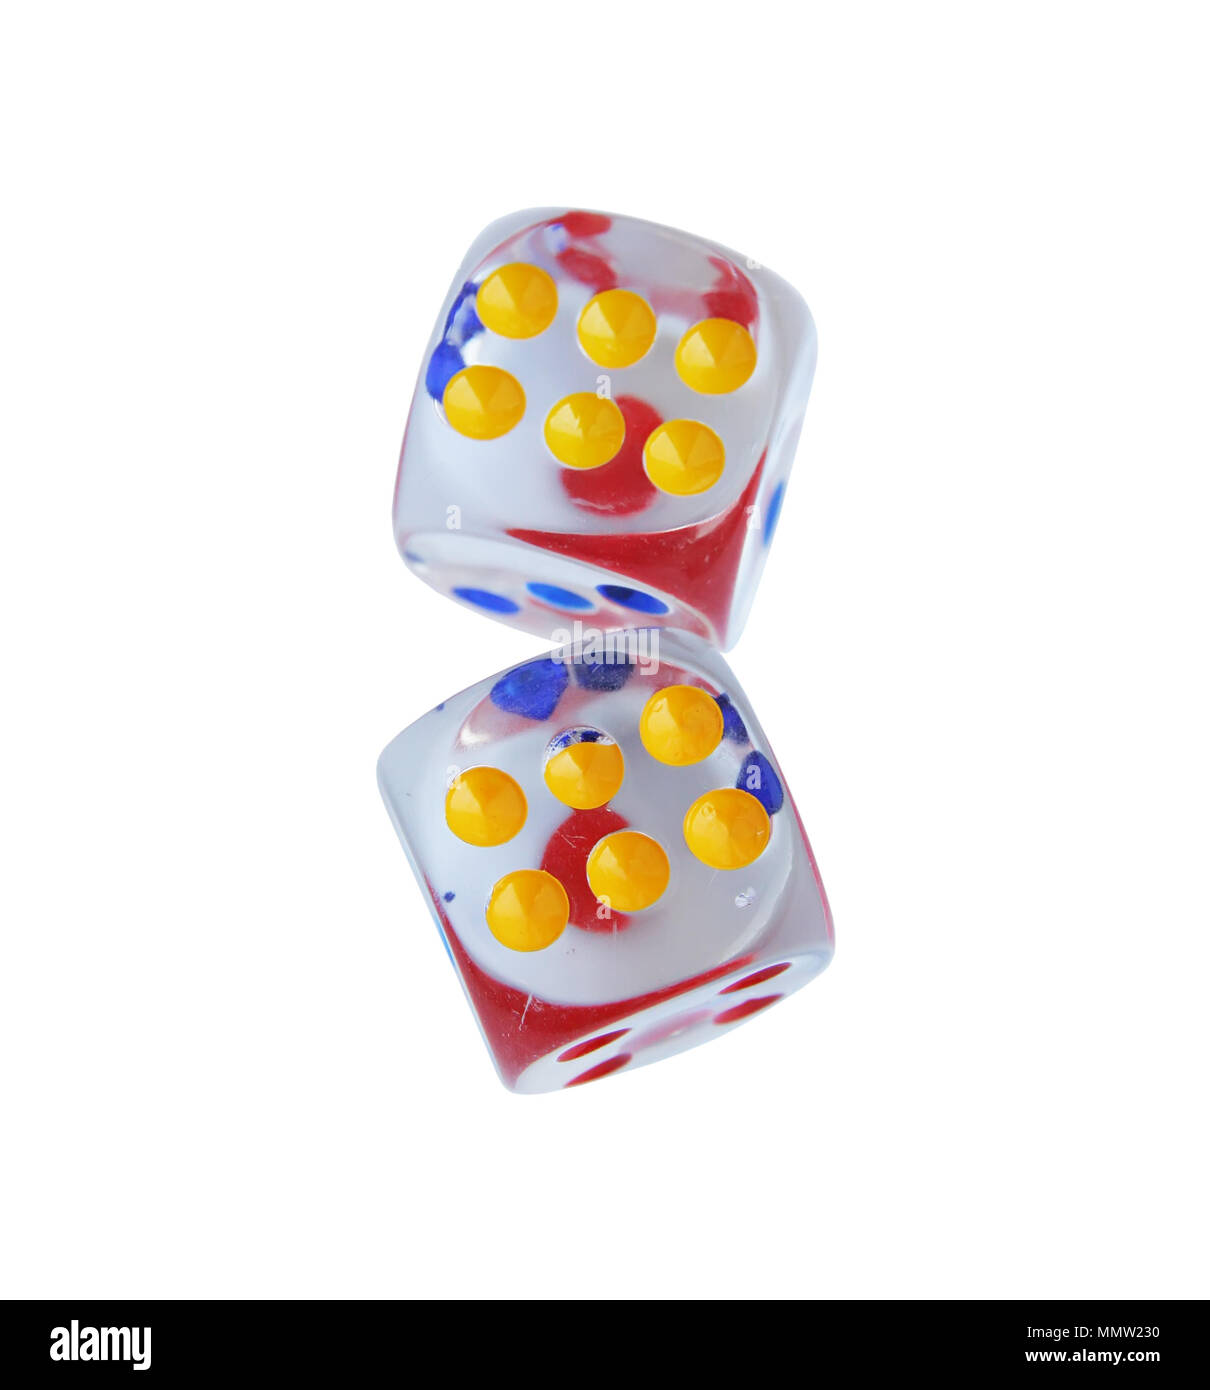 Transparent dices. Colorful dices. Glass made dices. Stock Photo